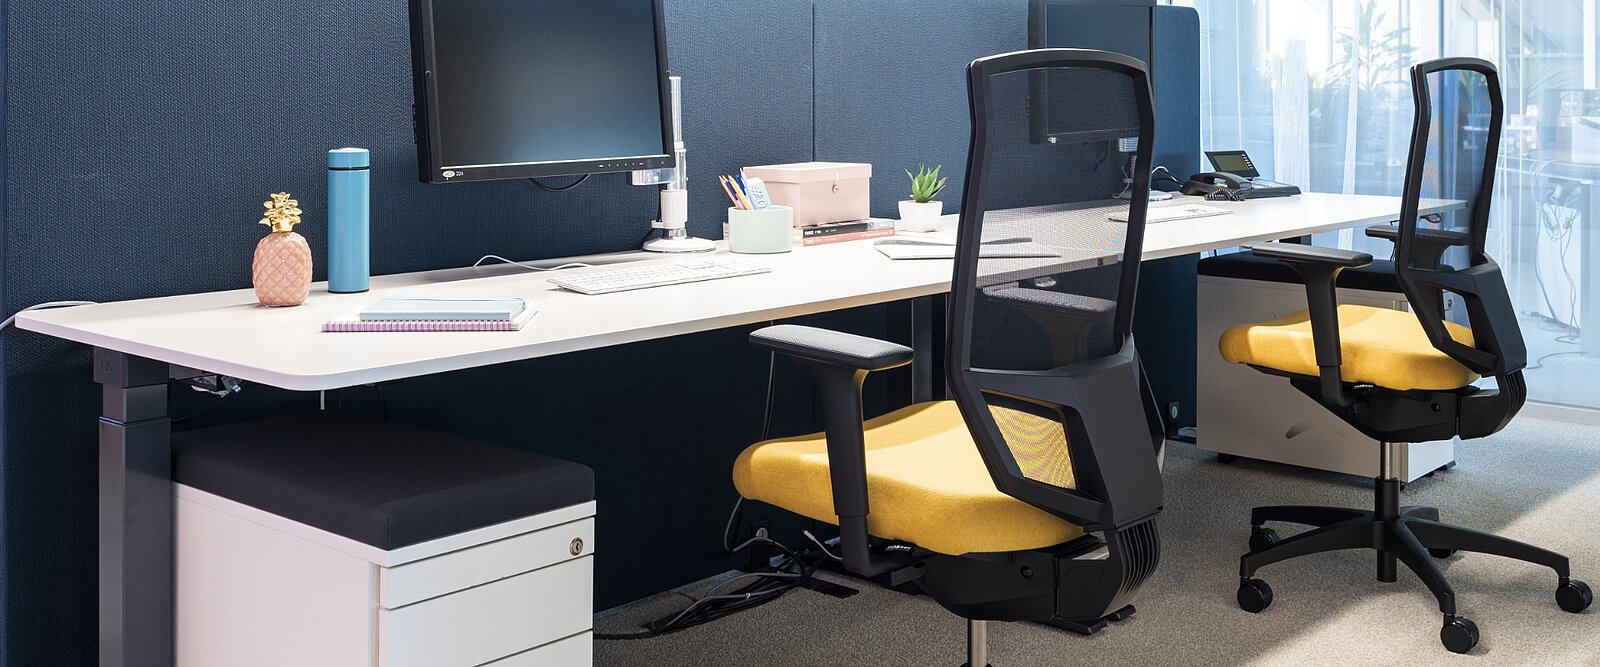 Stilo ES mesh fits perfectly into modern bench workplaces.